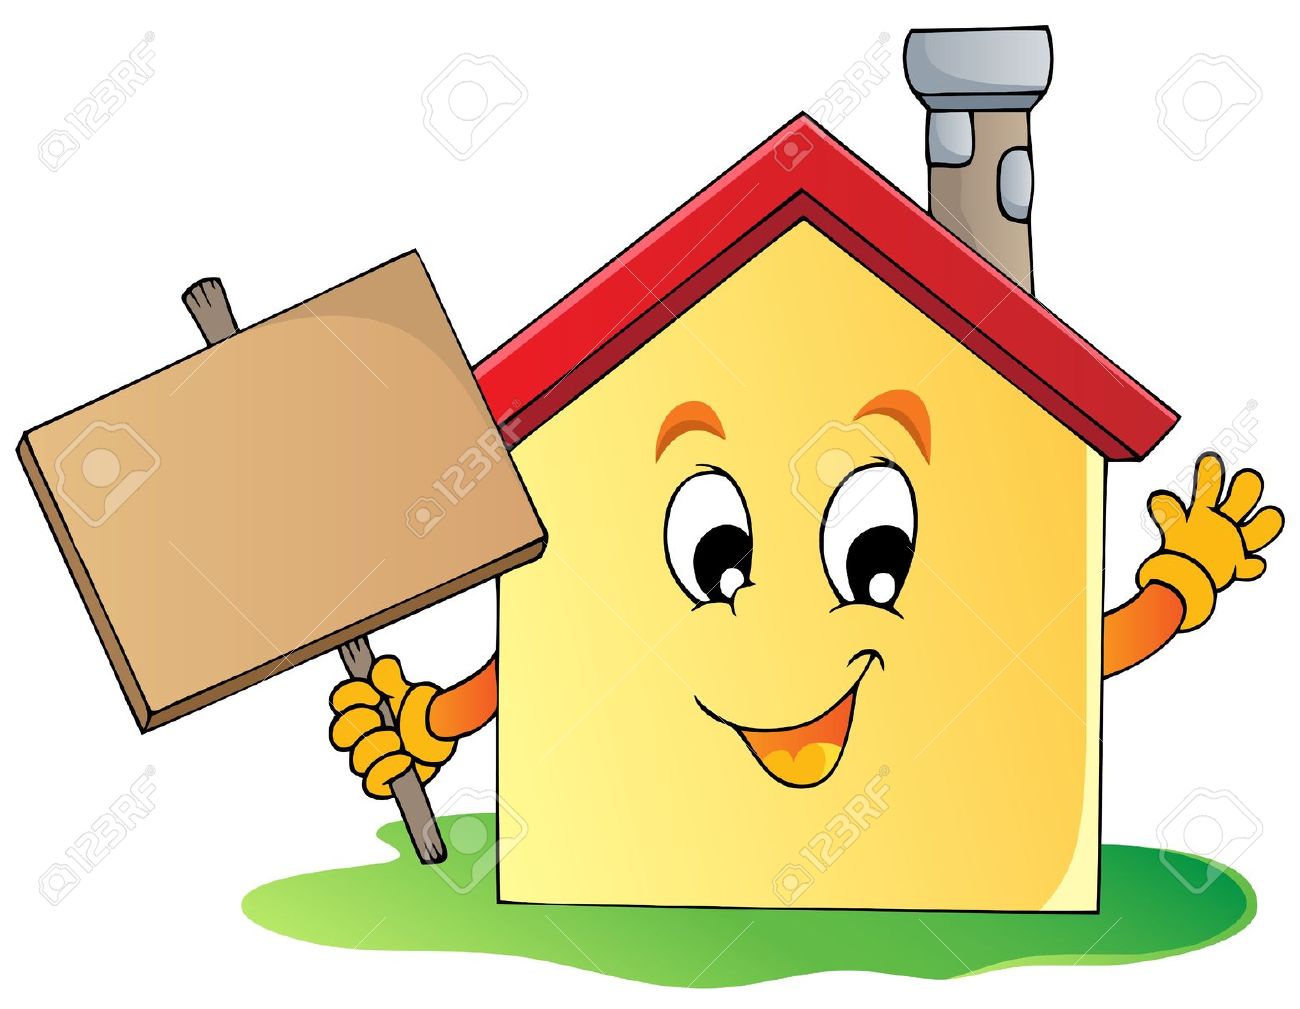 clipart yellow house - photo #35